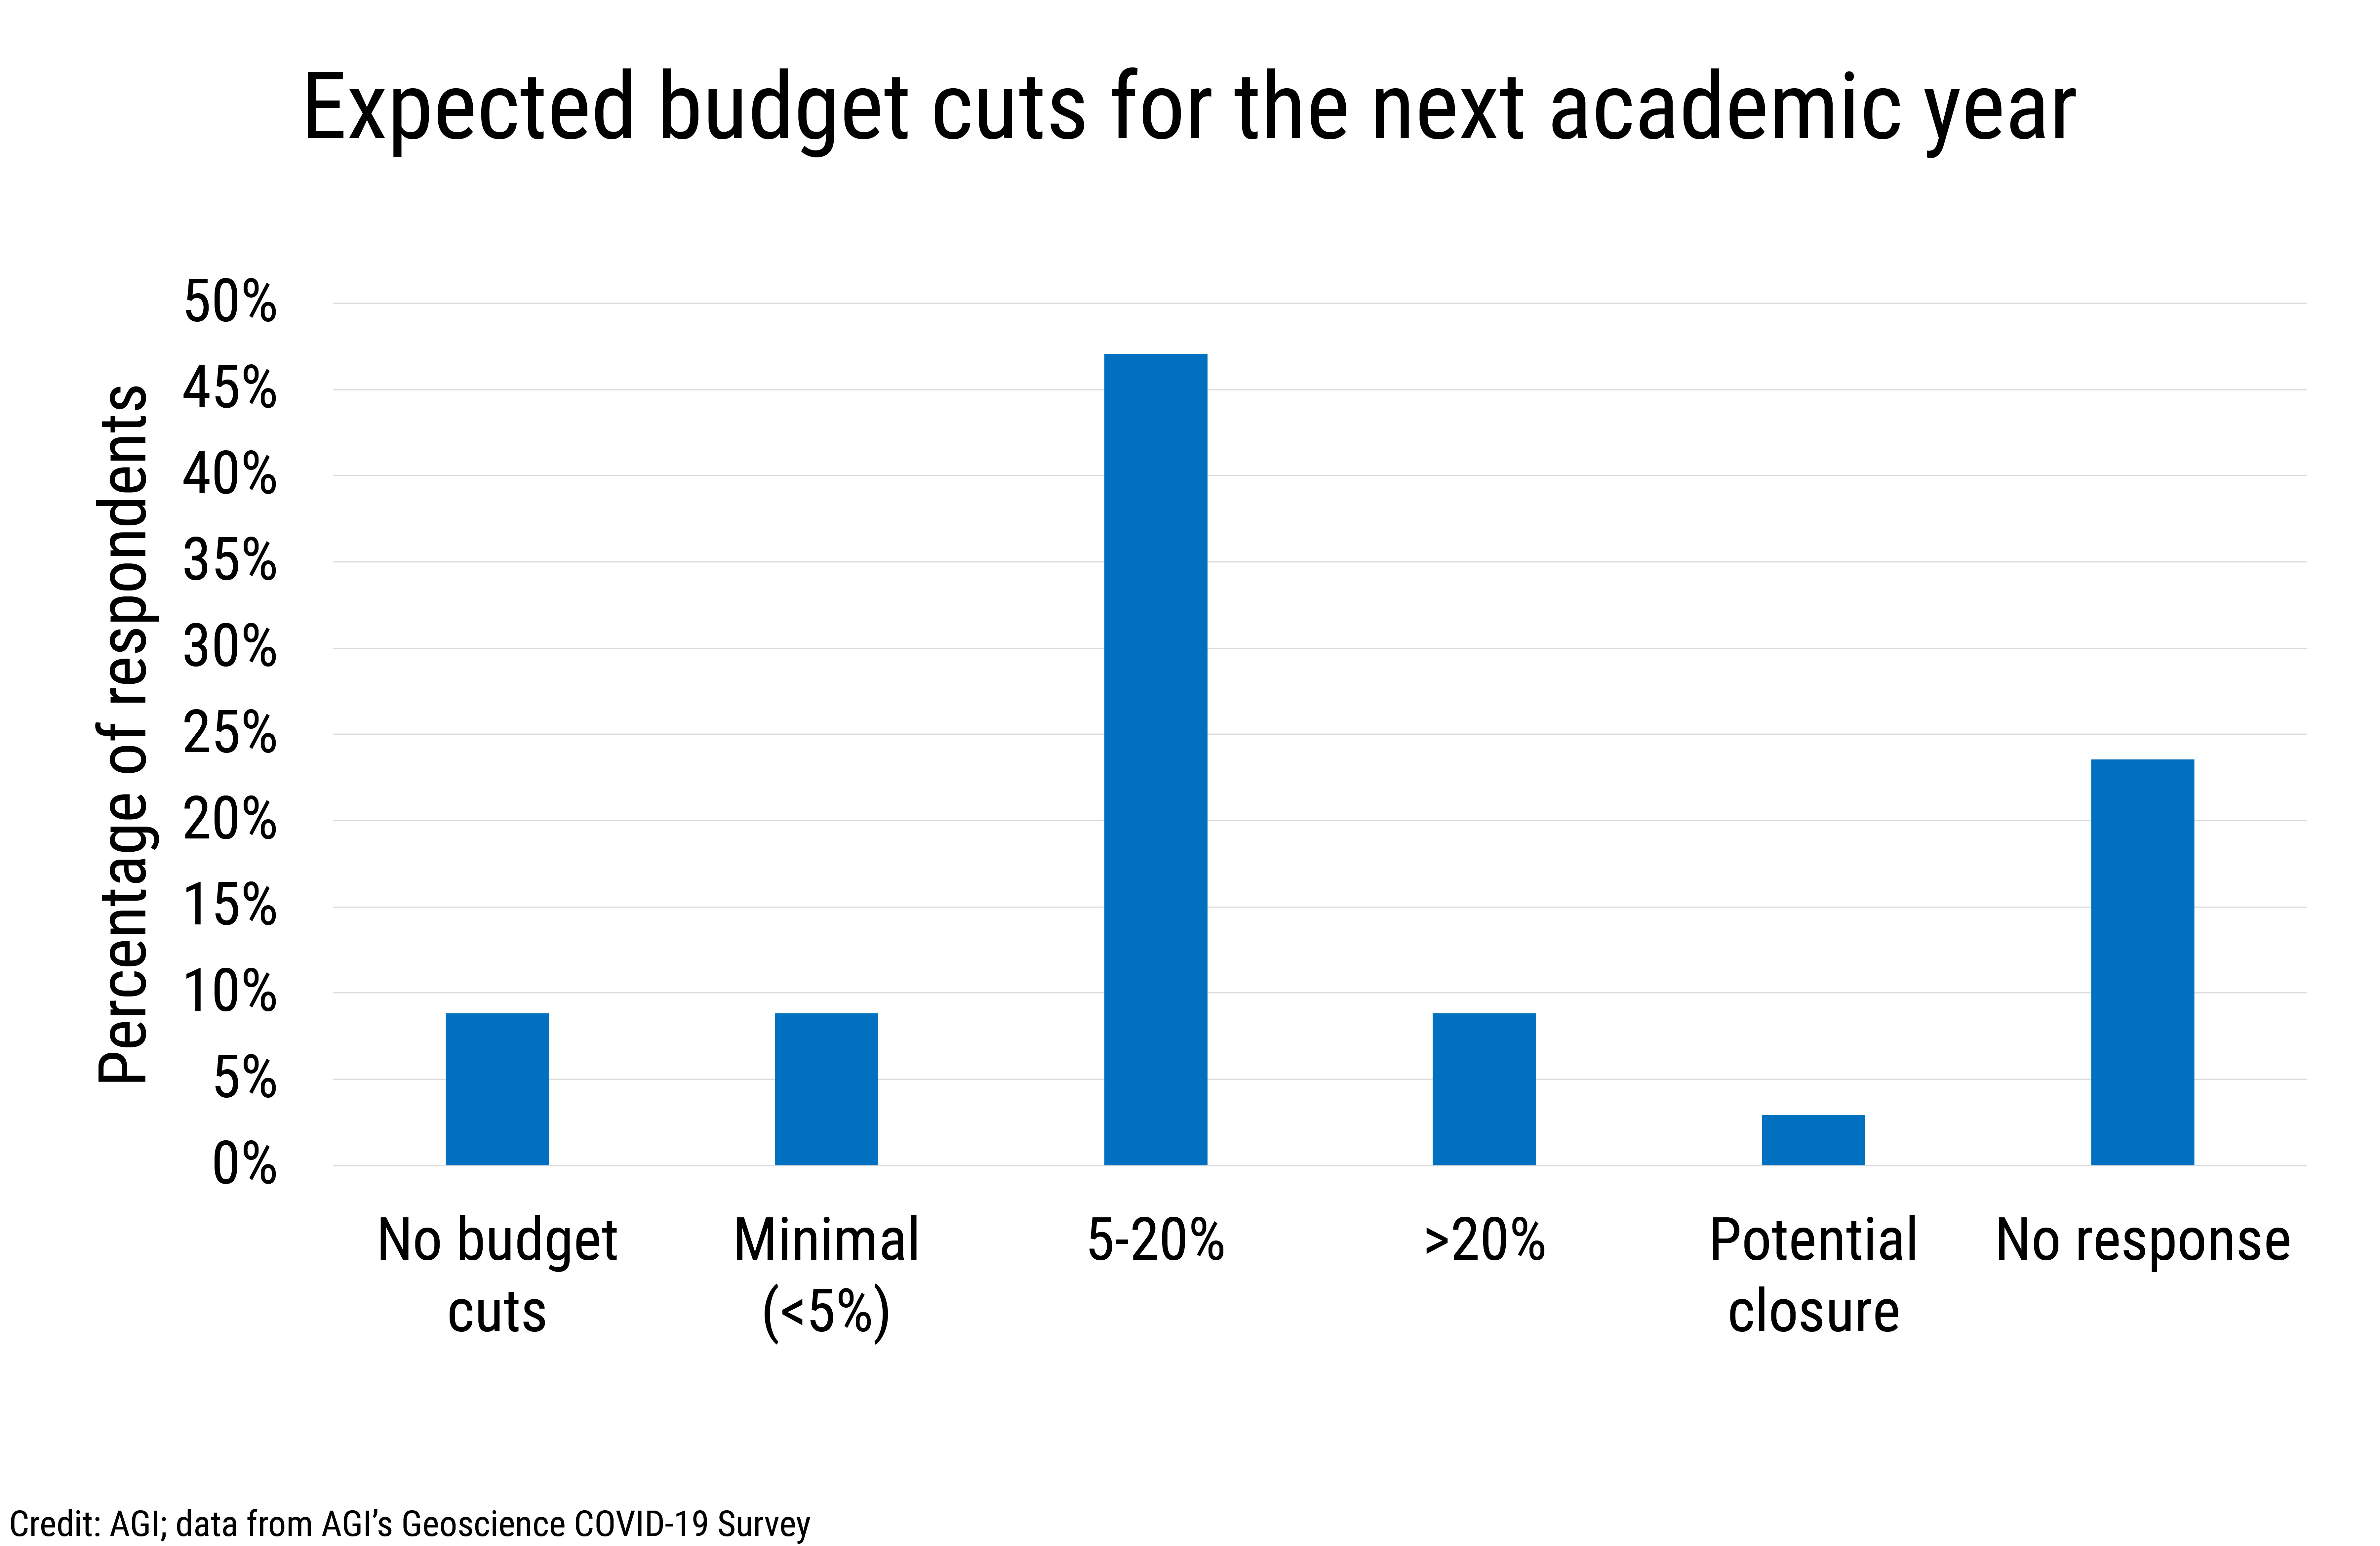 Data Brief 2020-007 chart 01: Expected budget cuts for the next academic year (credit: AGI)